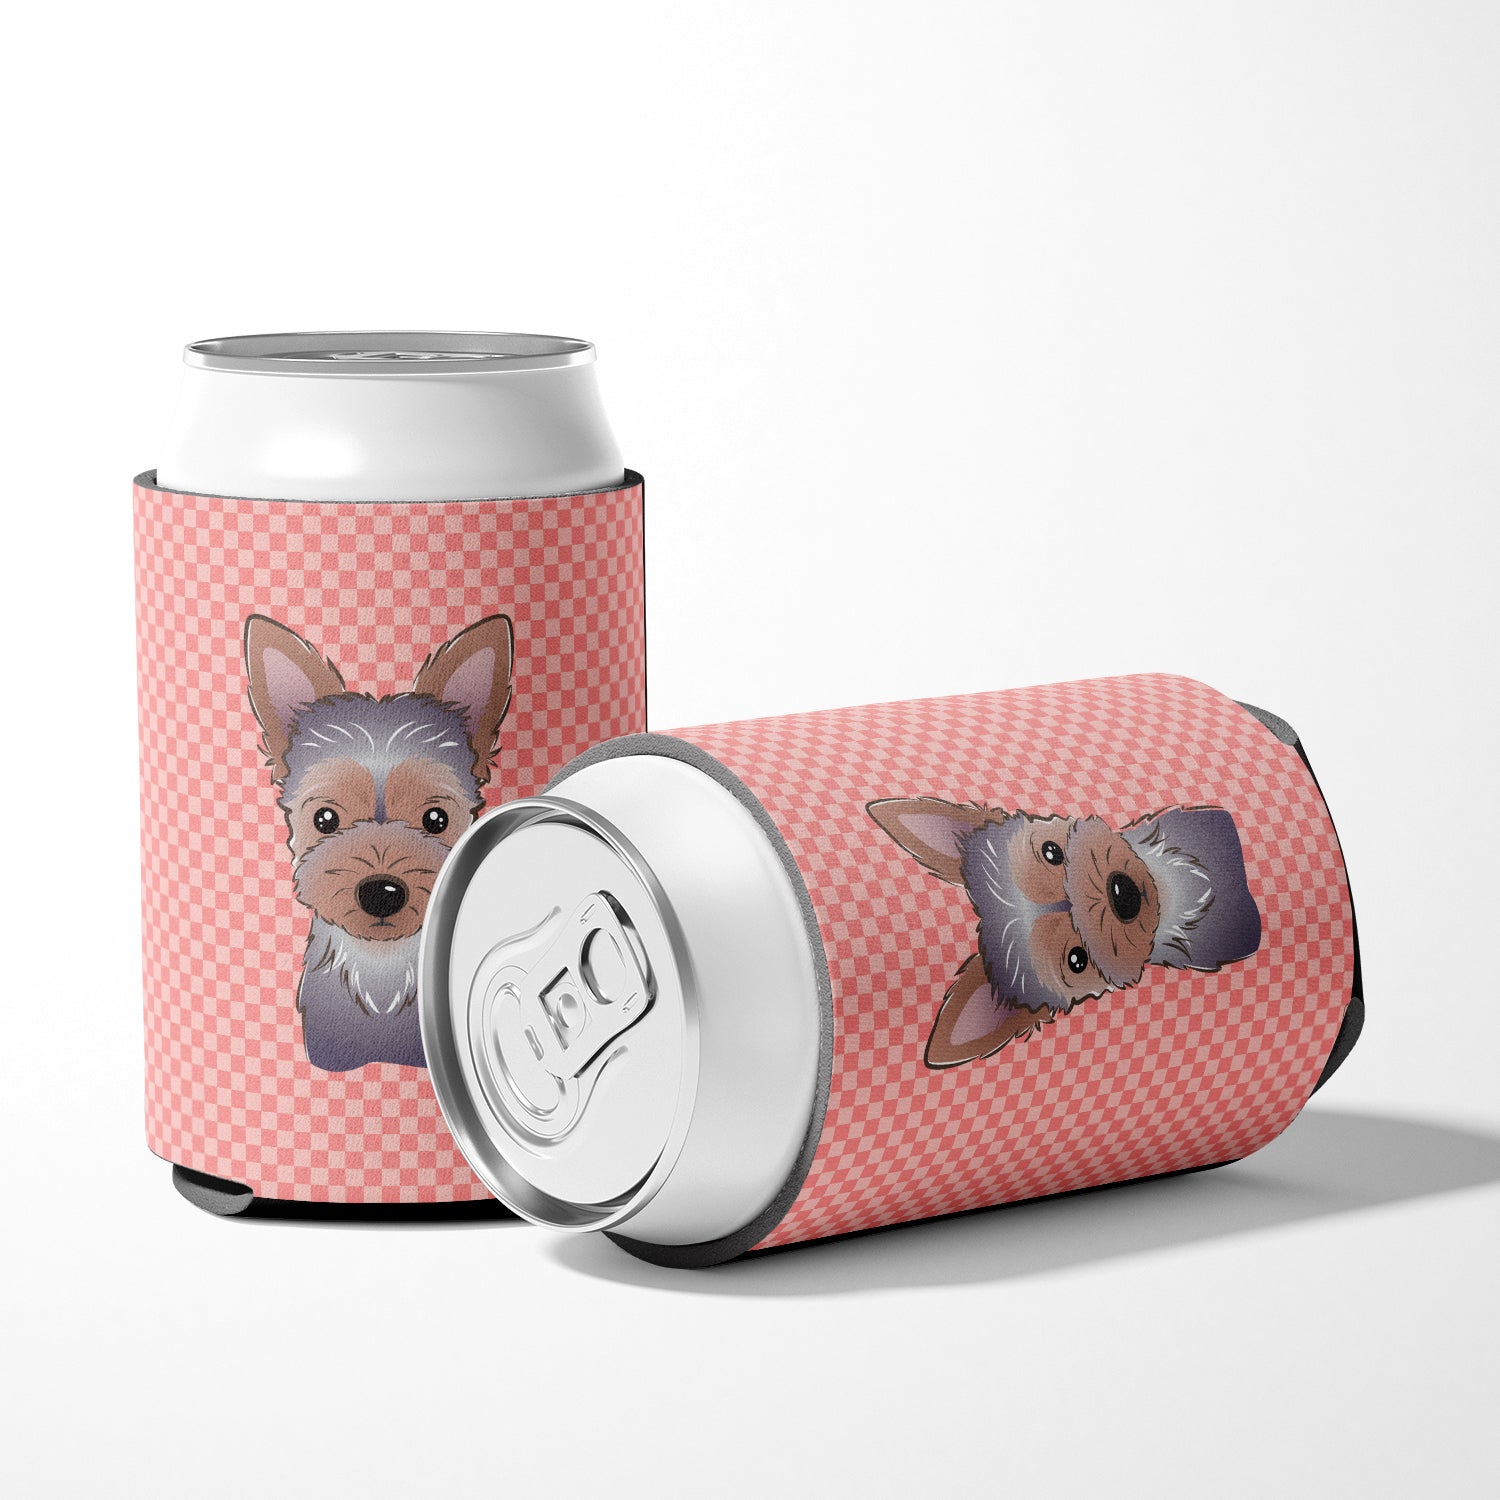 Checkerboard Pink Yorkie Puppy Can or Bottle Hugger BB1232CC